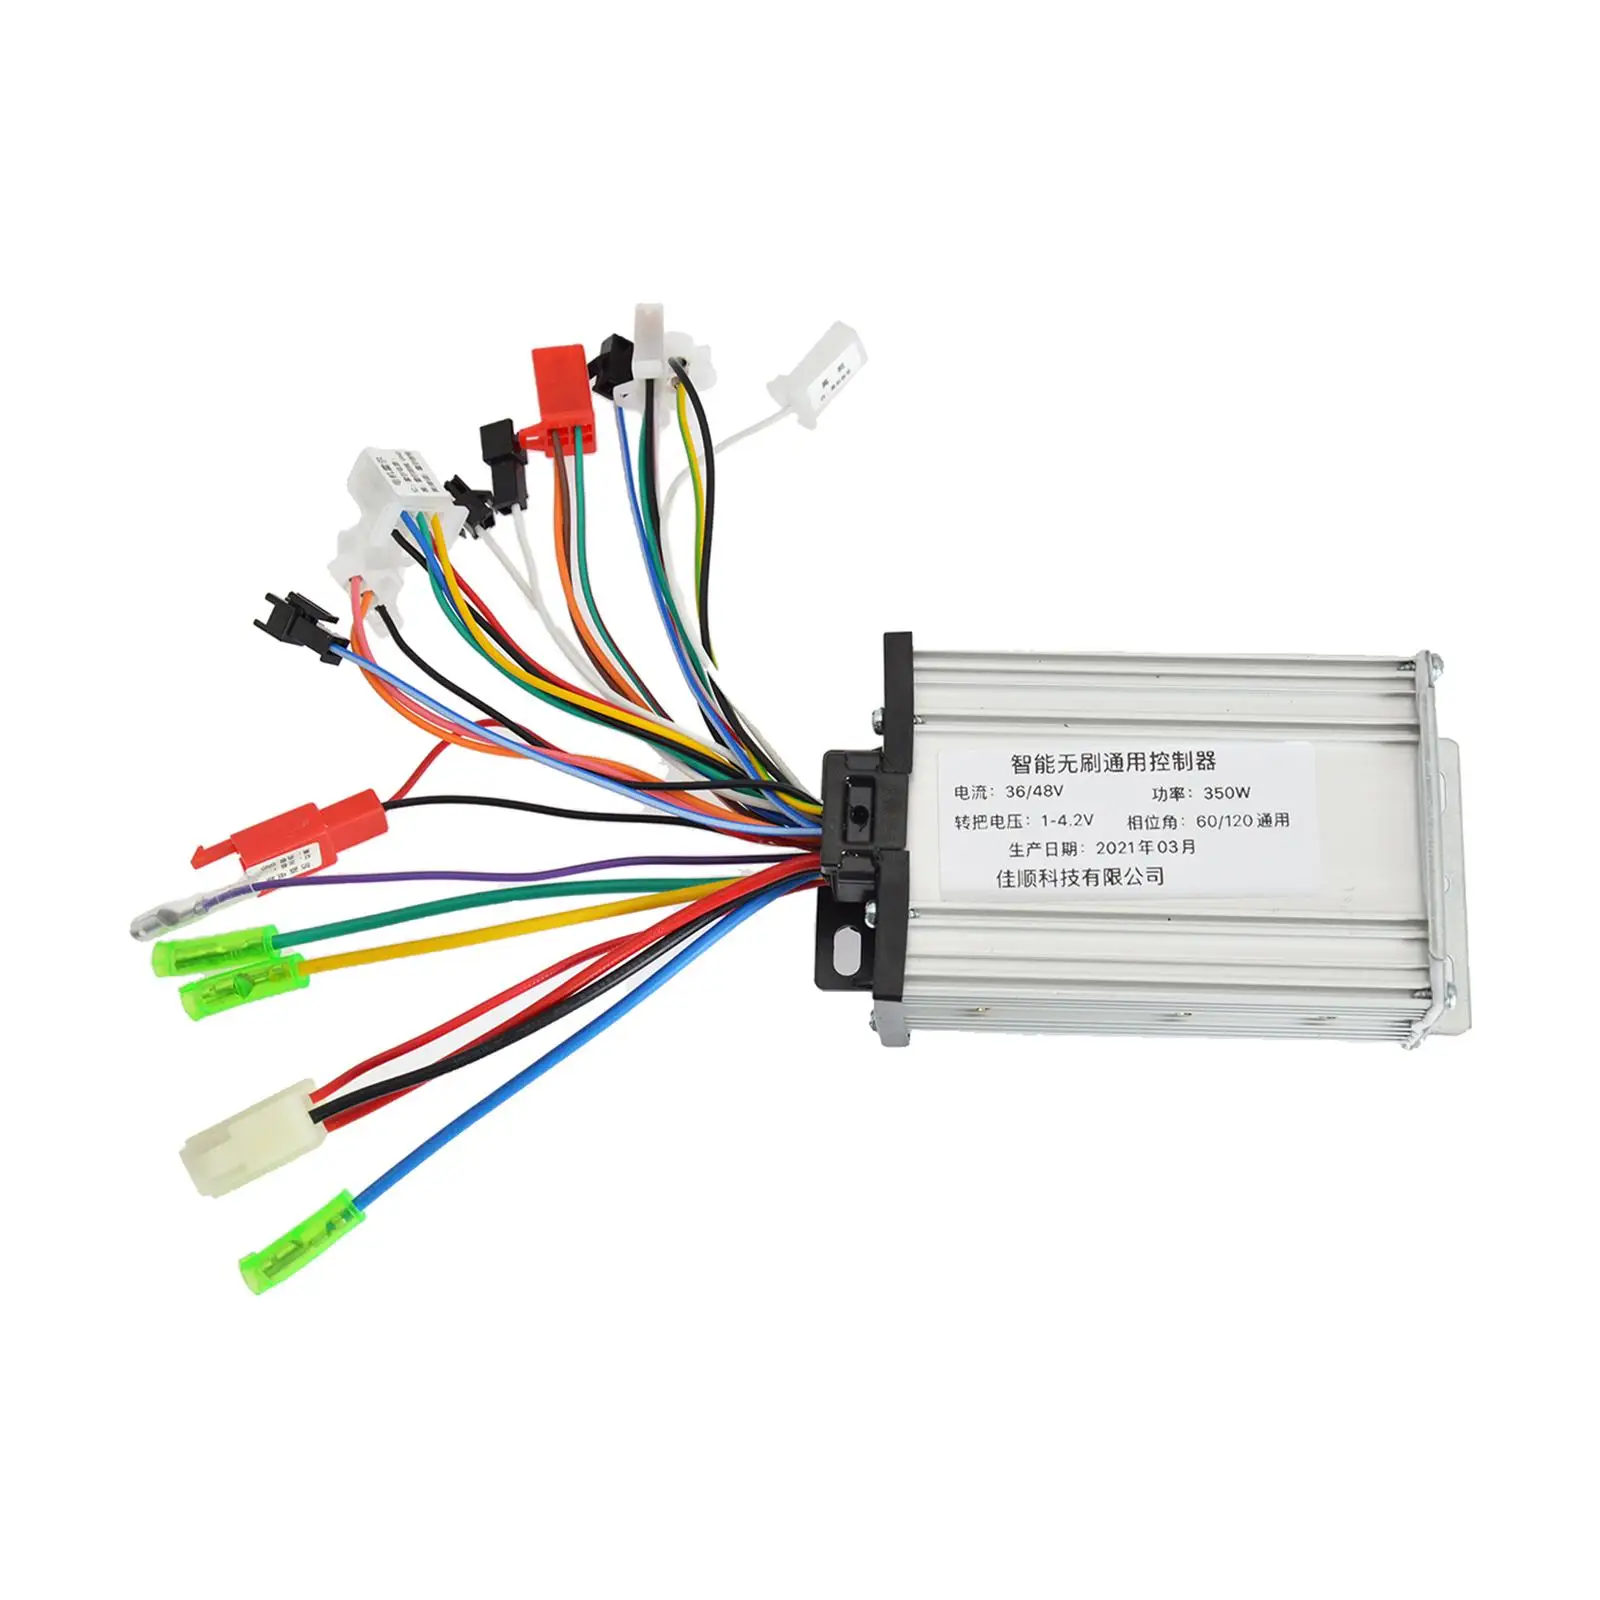 Deluxe Electric Bicycle Controller 350W Motor Control Box Conversion